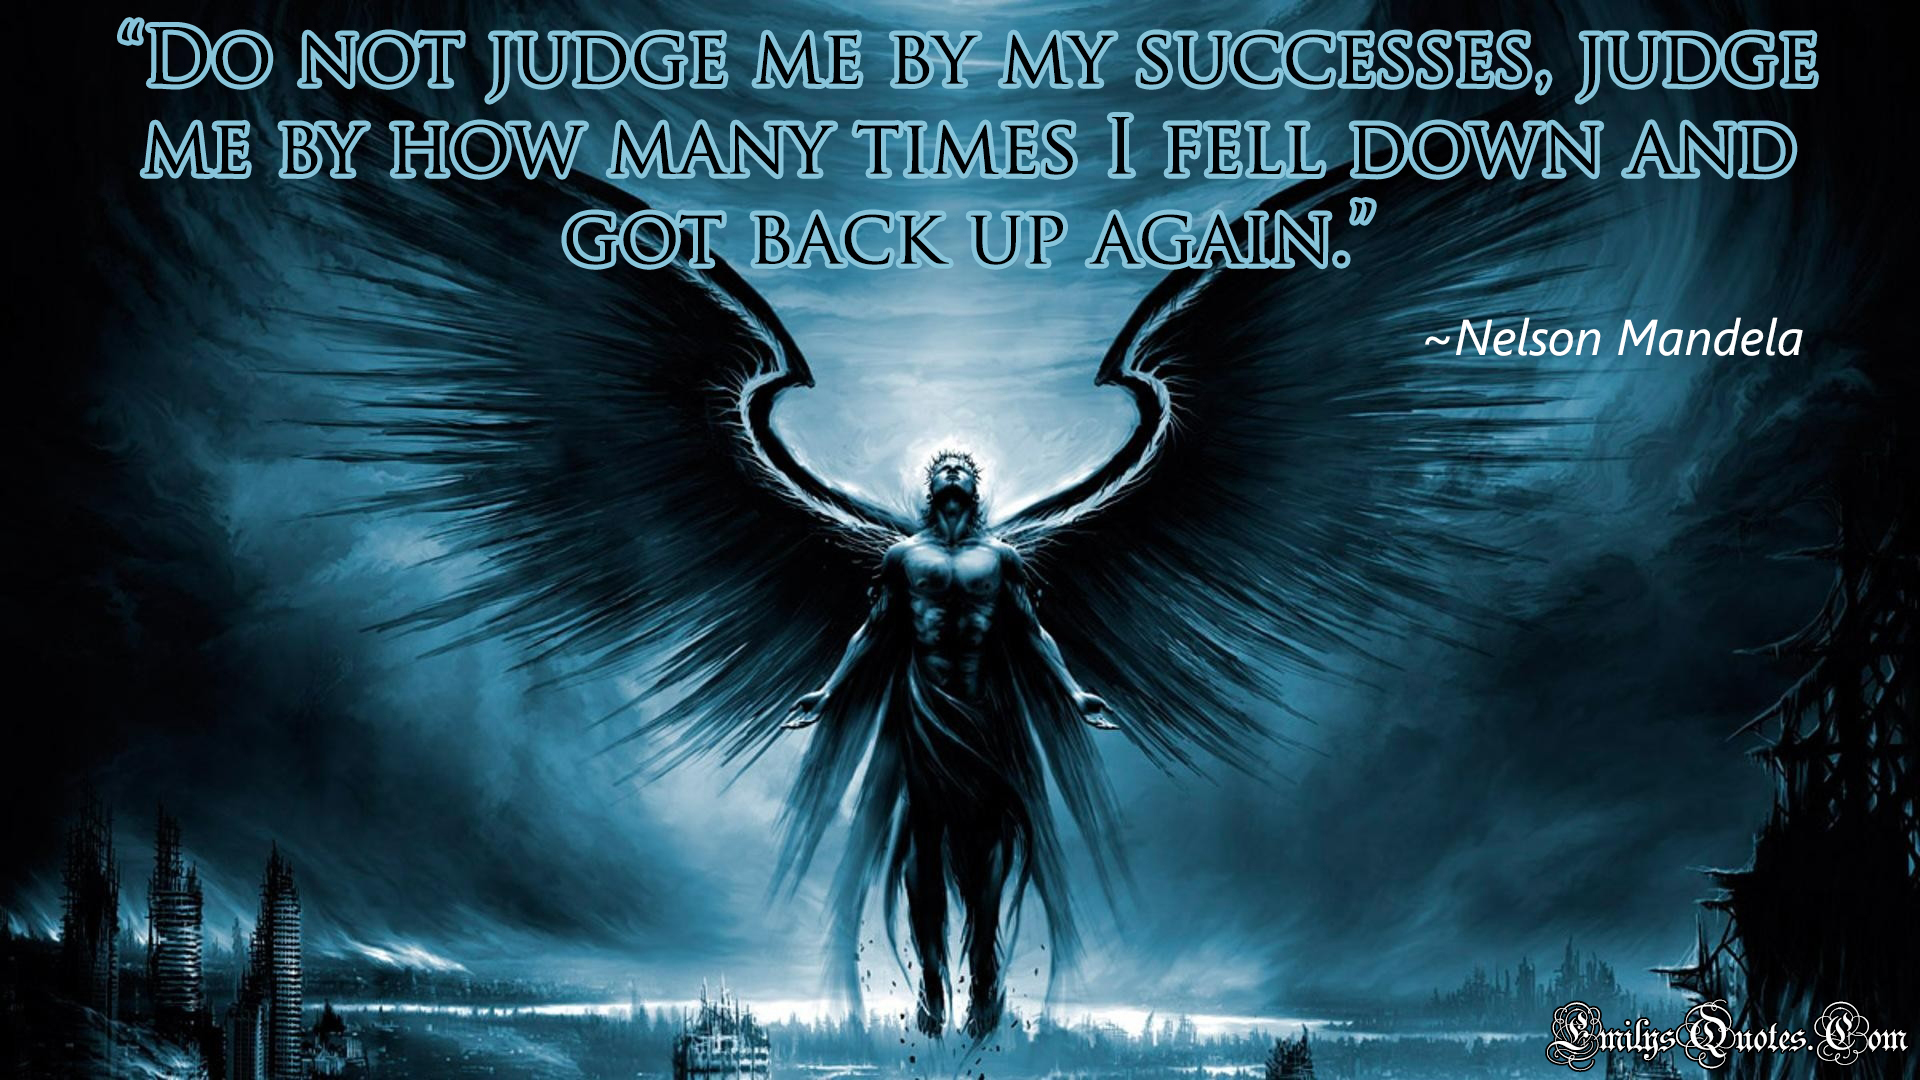 Do not judge me by my successes, judge me by how many times